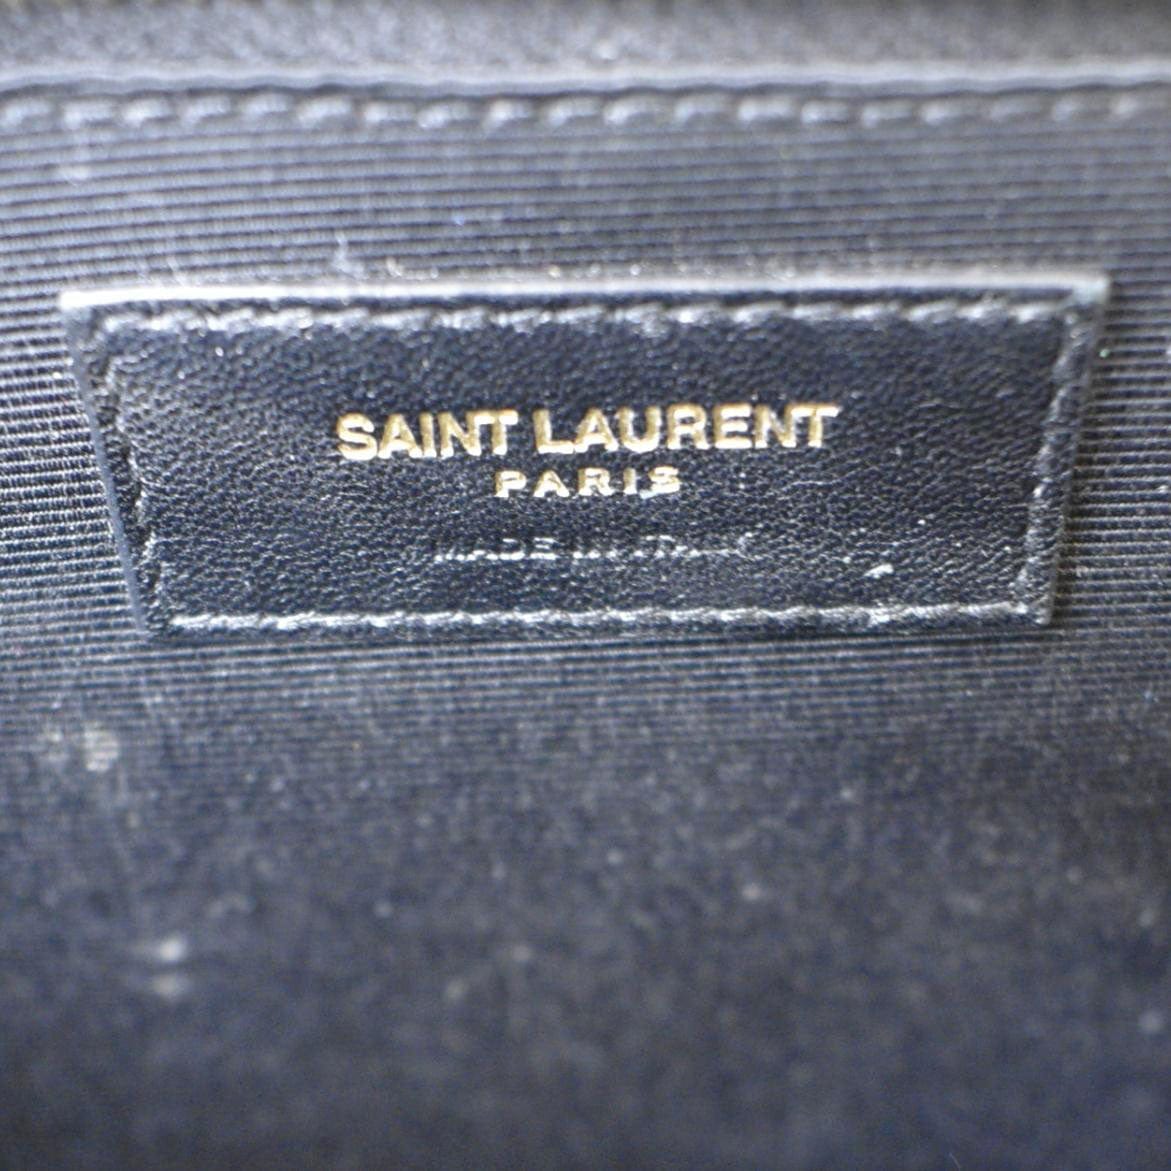 Saint Laurent Large Leather Shopping Bag in Blue